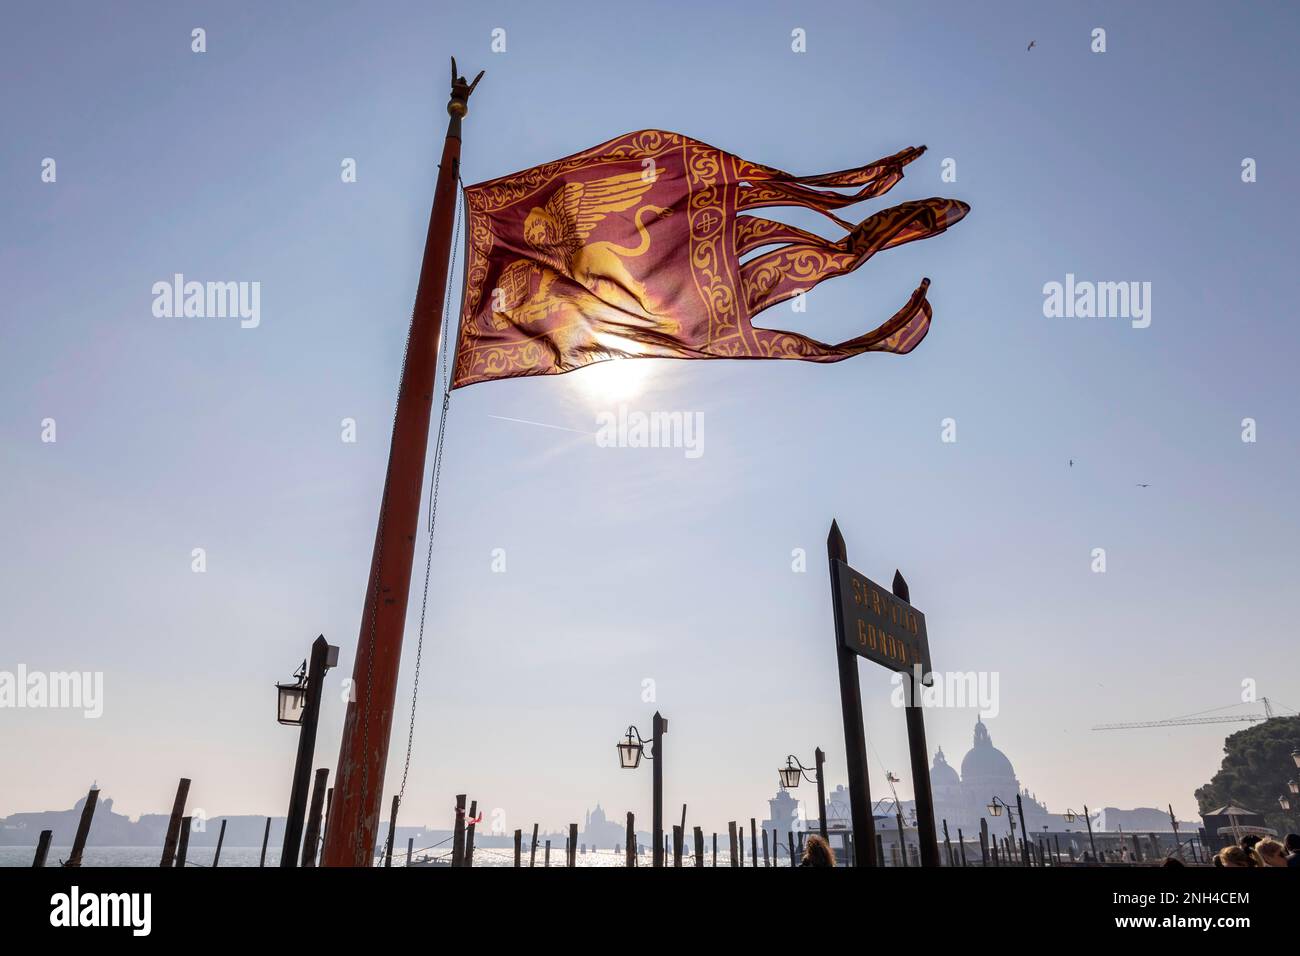 Flag and silhouette, Venice, Italy Stock Photo